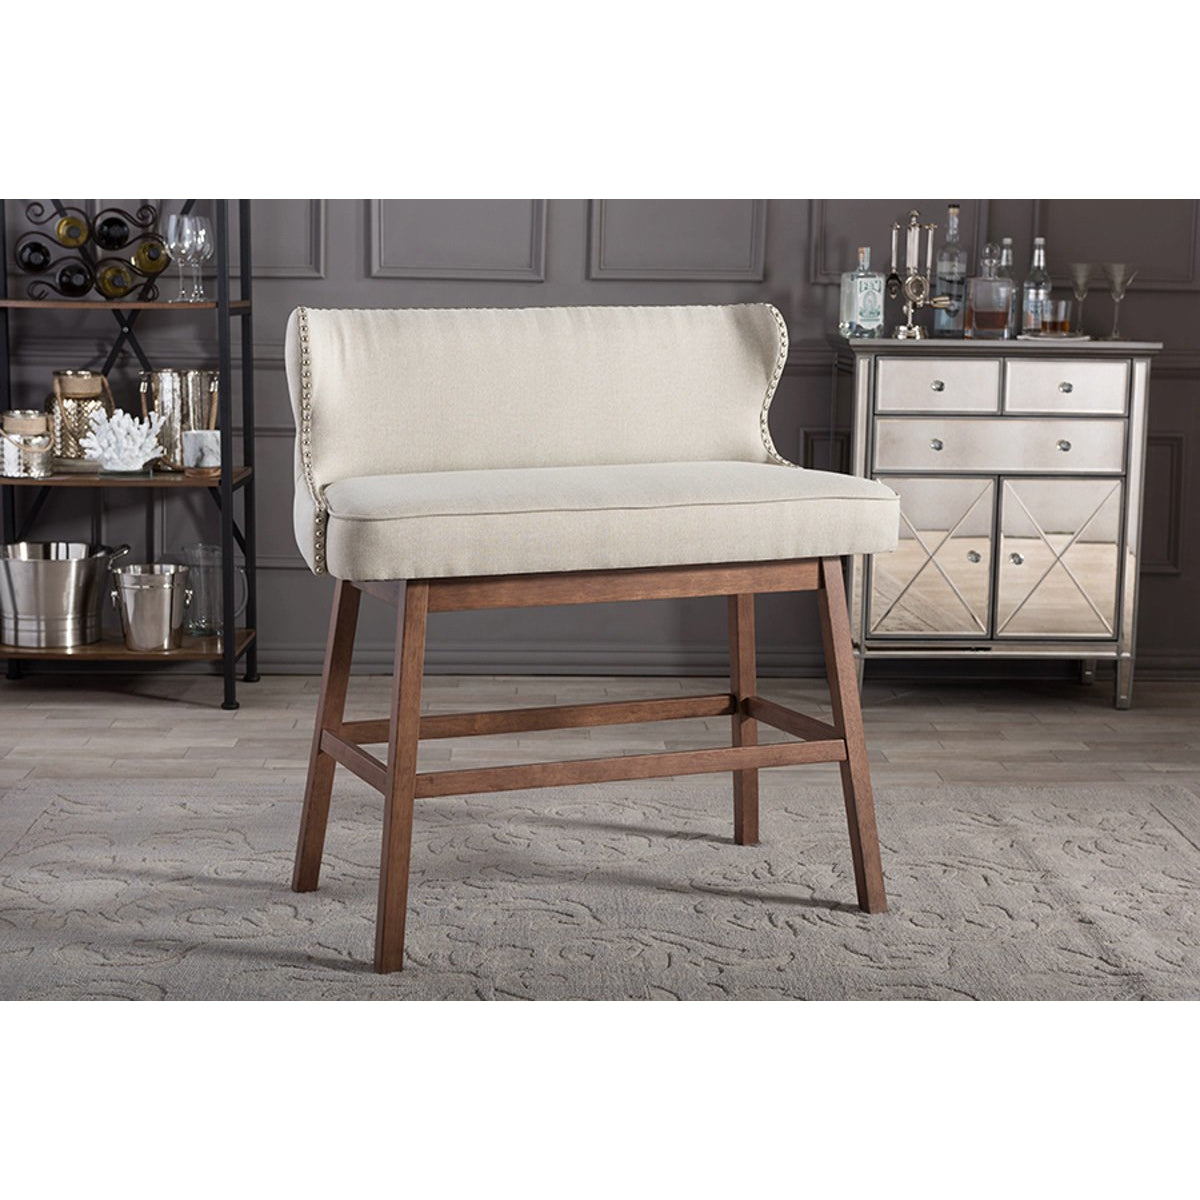 Baxton Studio Gradisca Modern and Contemporary Light Beige Fabric Button-tufted Upholstered Bar Bench Banquette Baxton Studio-Bar Stools-Minimal And Modern - 6